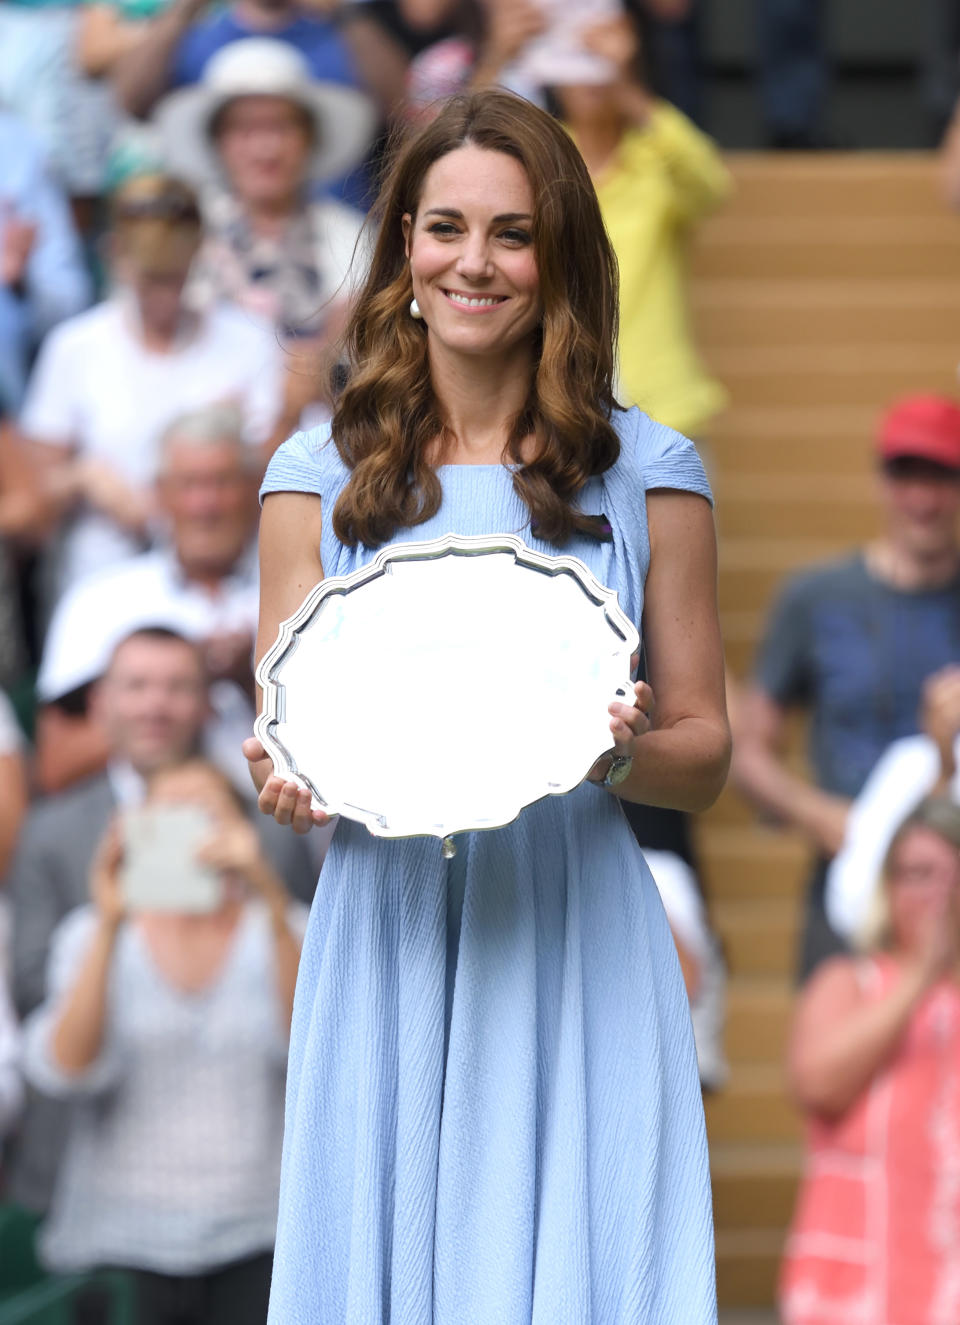 LONDON, ENGLAND - JULY 14: Catherine, Duchess of Cambridge on Centre court during Men's Finals Day of the Wimbledon Tennis Championships at All England Lawn Tennis and Croquet Club on July 14, 2019 in London, England. (Photo by Karwai Tang/Getty Images)